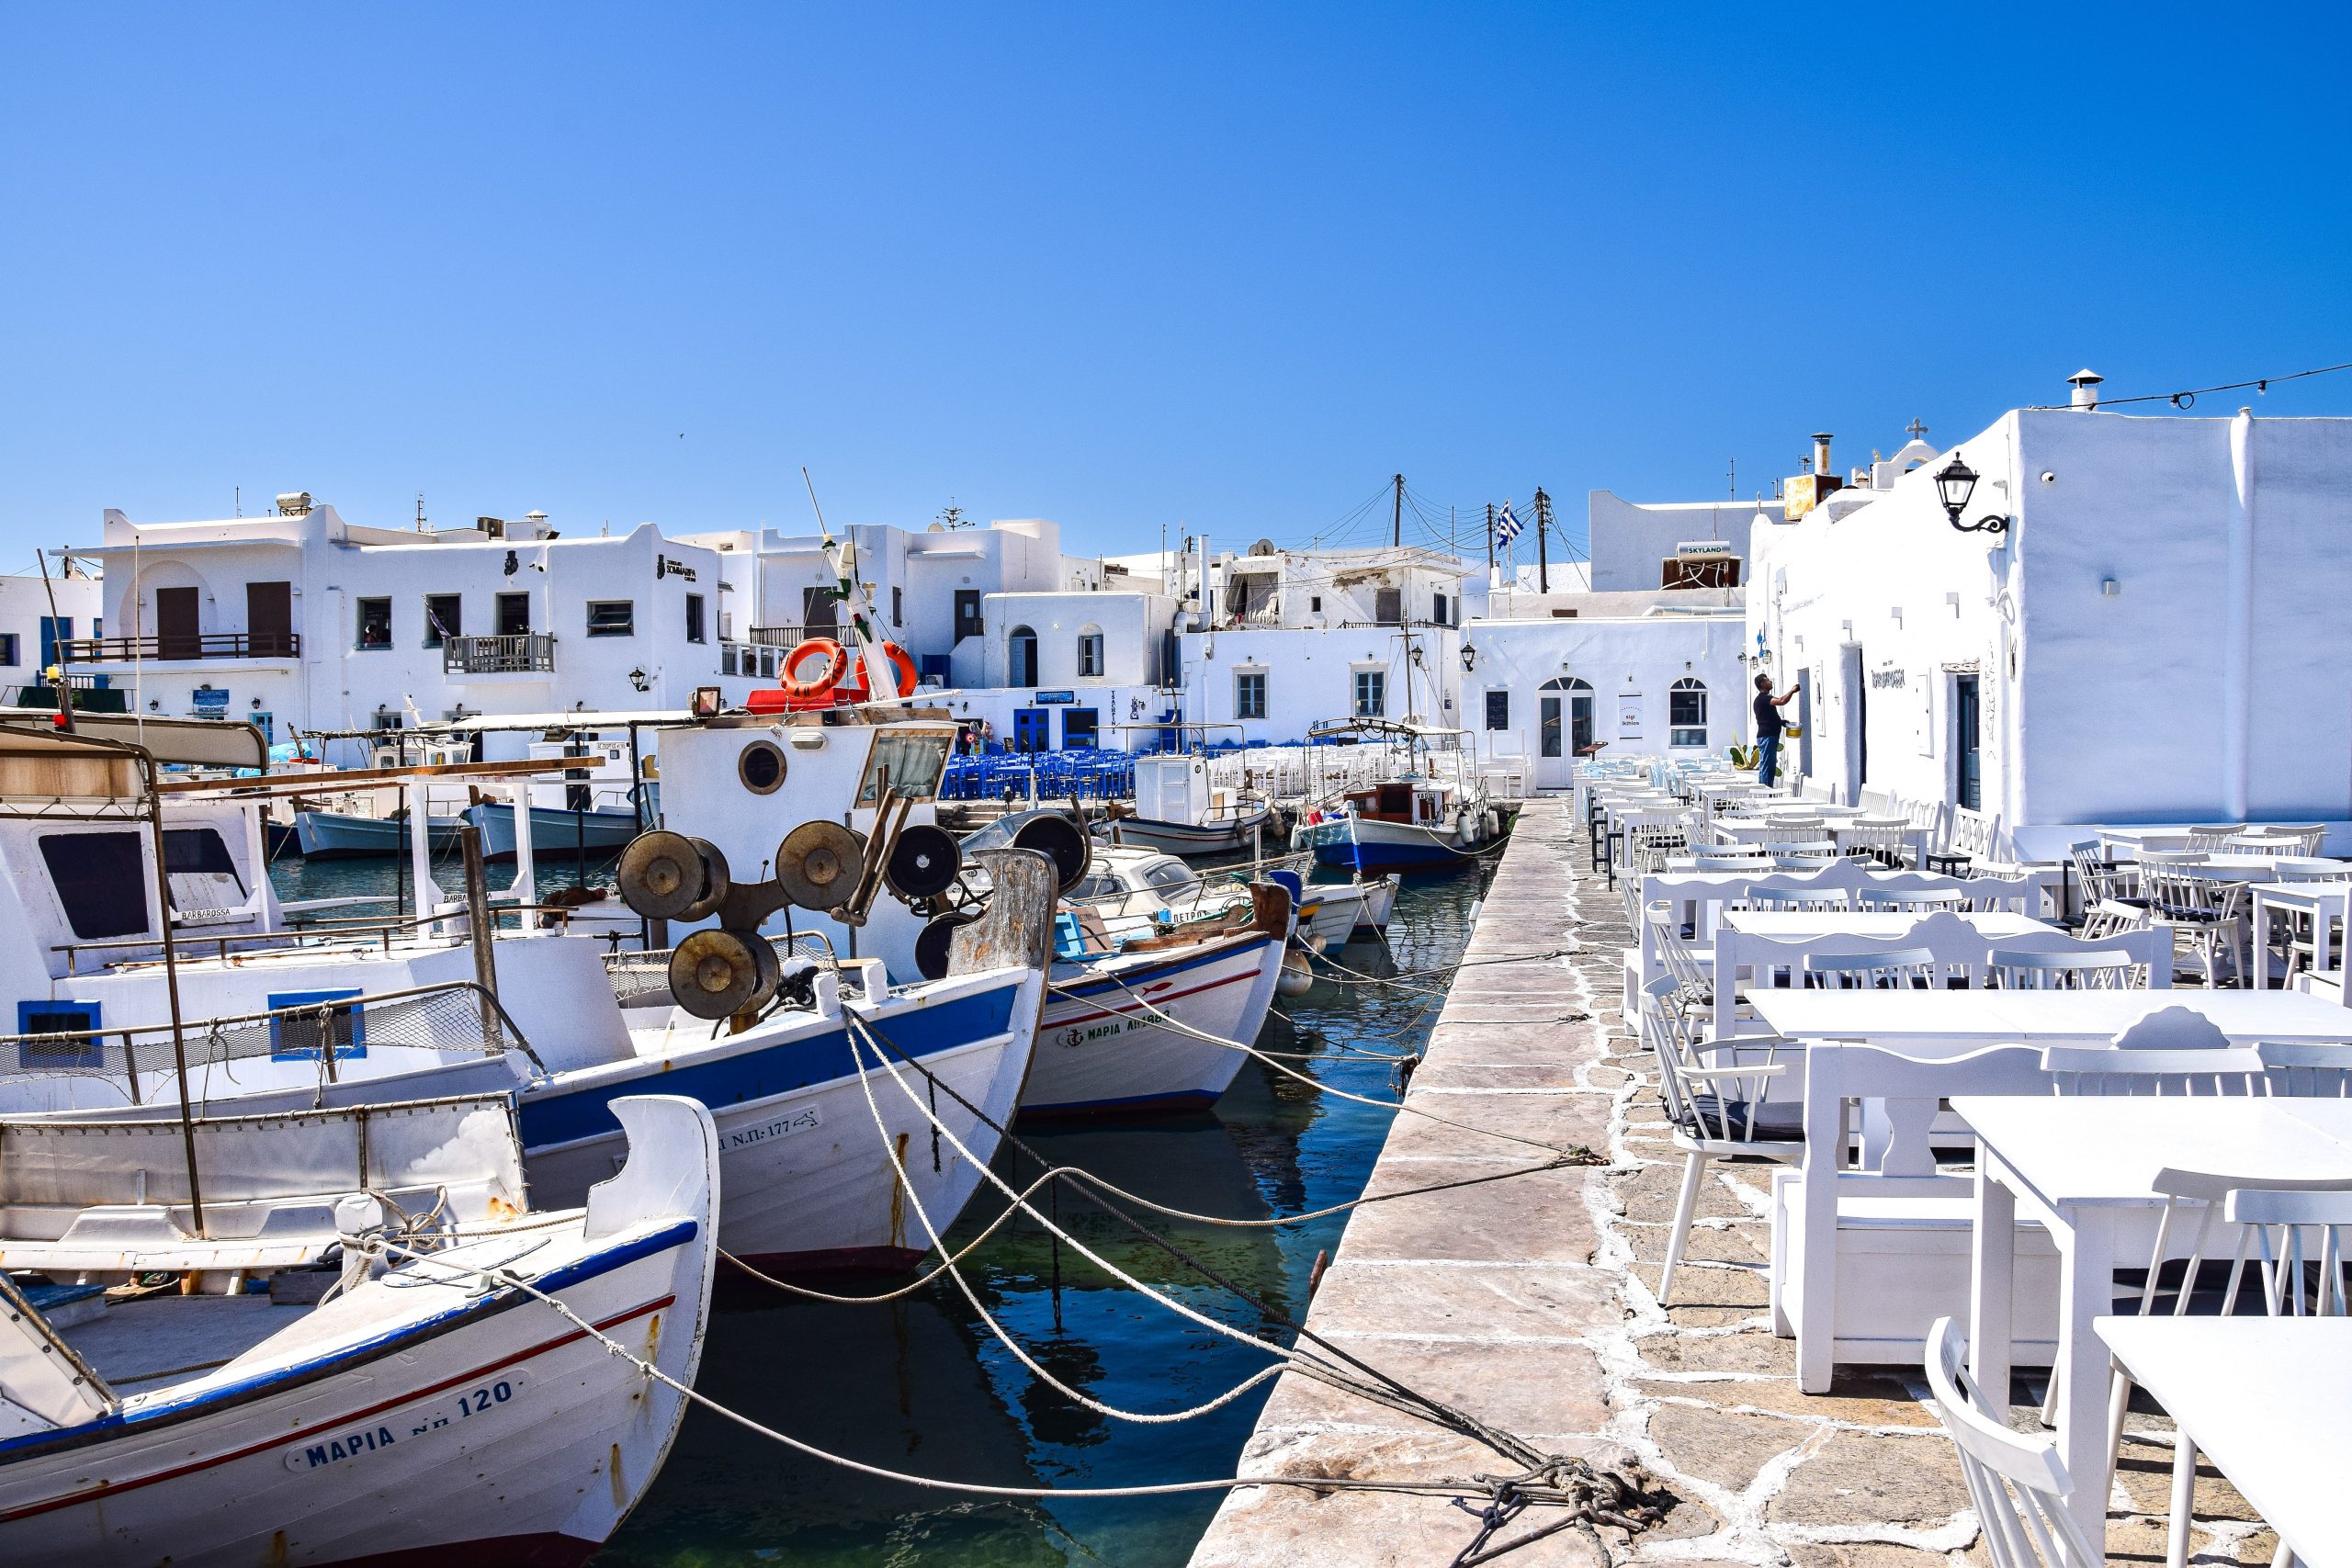 Paros: Among the three “destinations of the year”